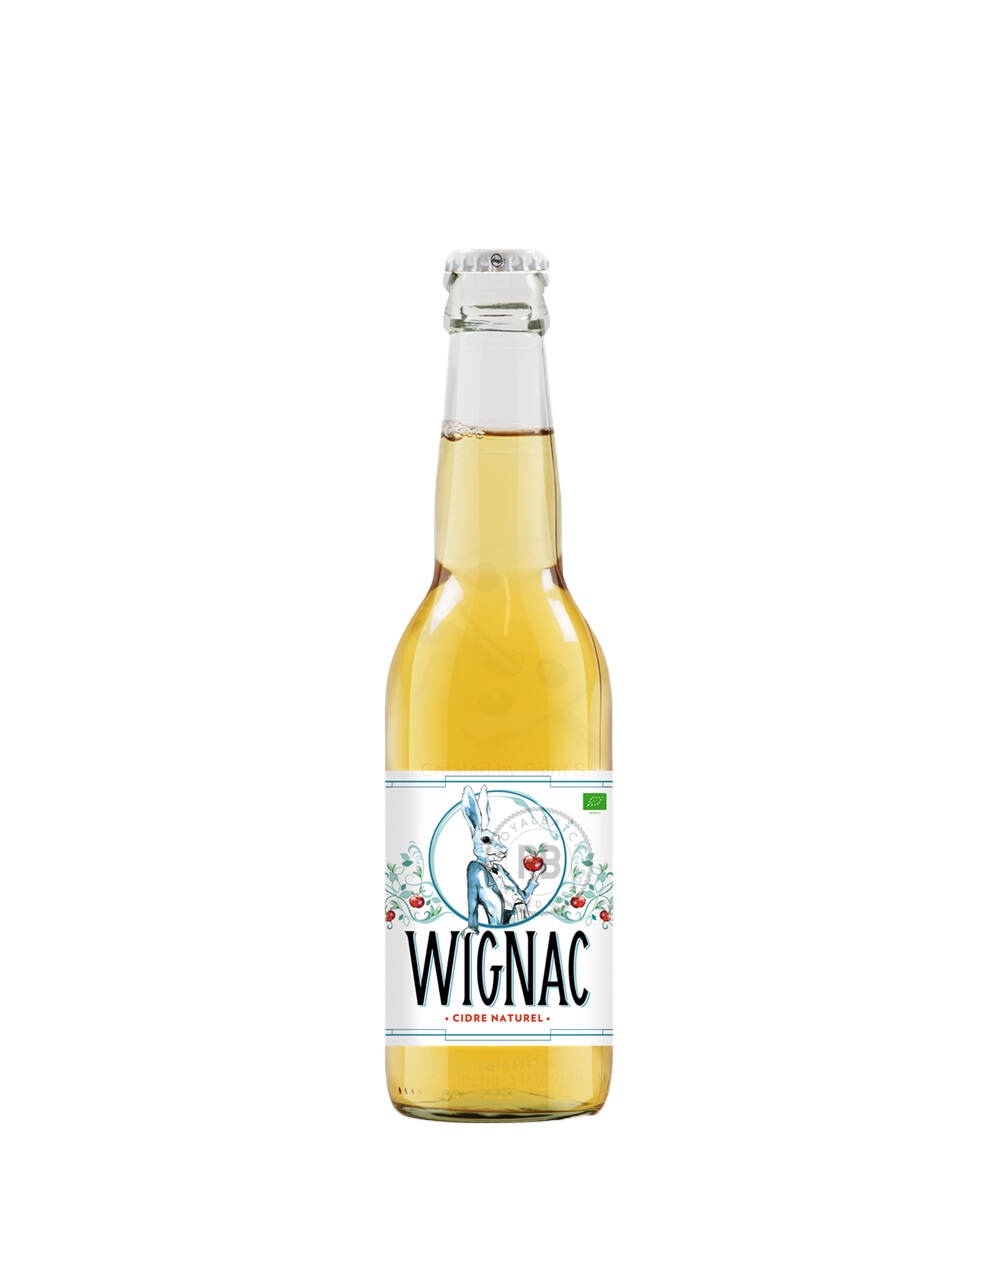 Wignac Le Lievre by French Cider and Spirits 330ml